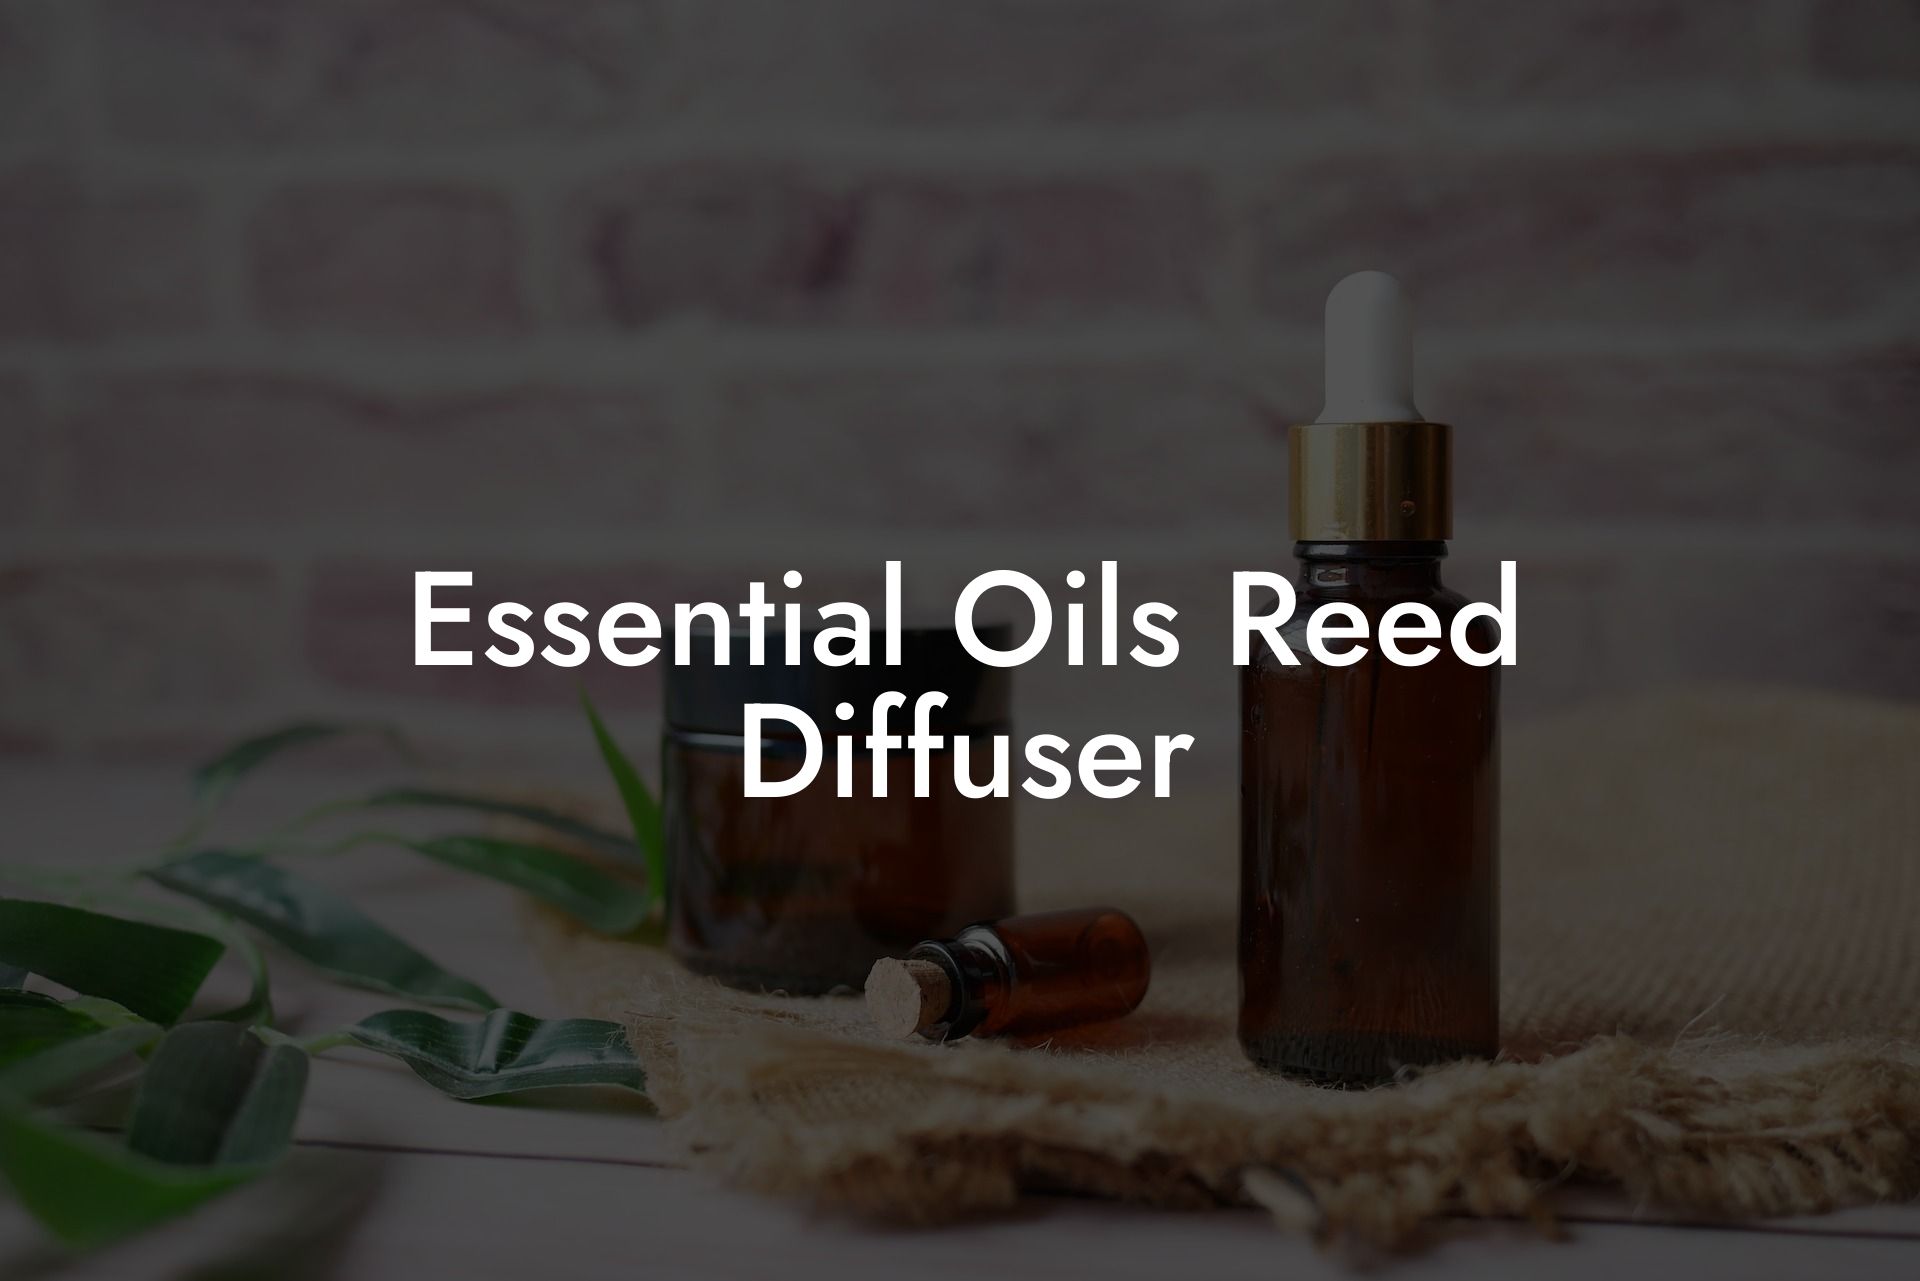 Essential Oils Reed Diffuser